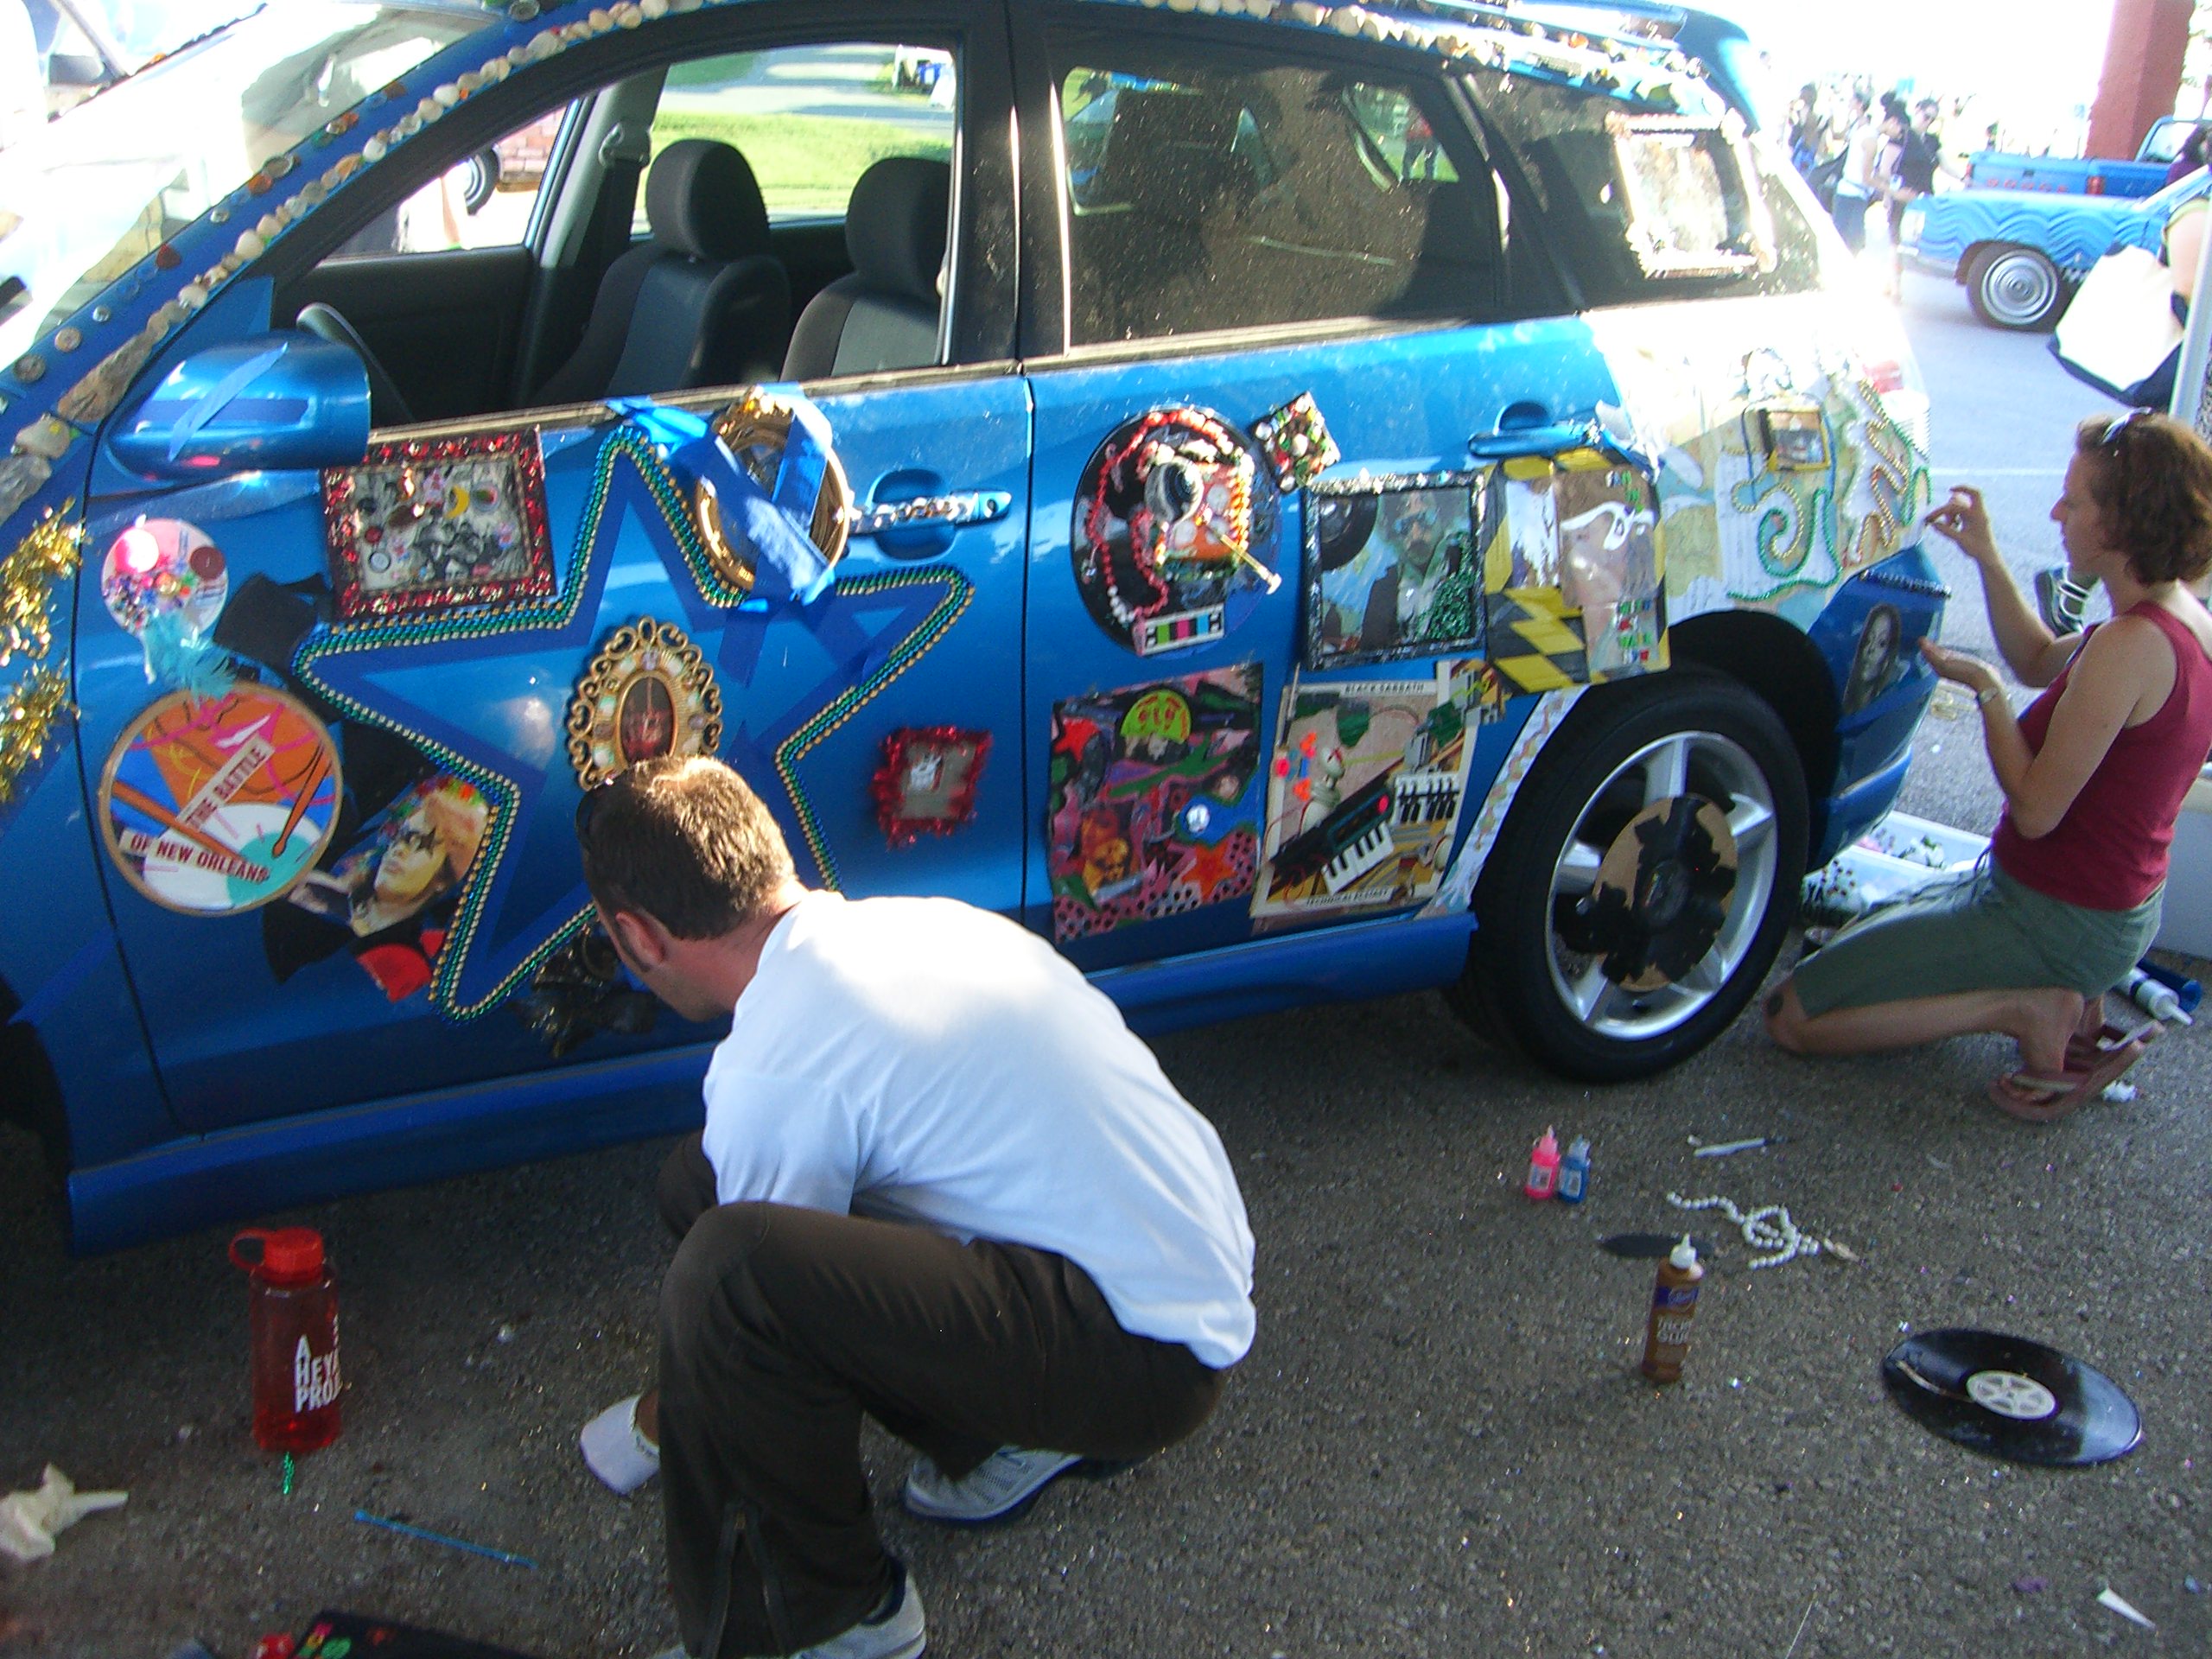 People decorating a car at Maker Faire 2007